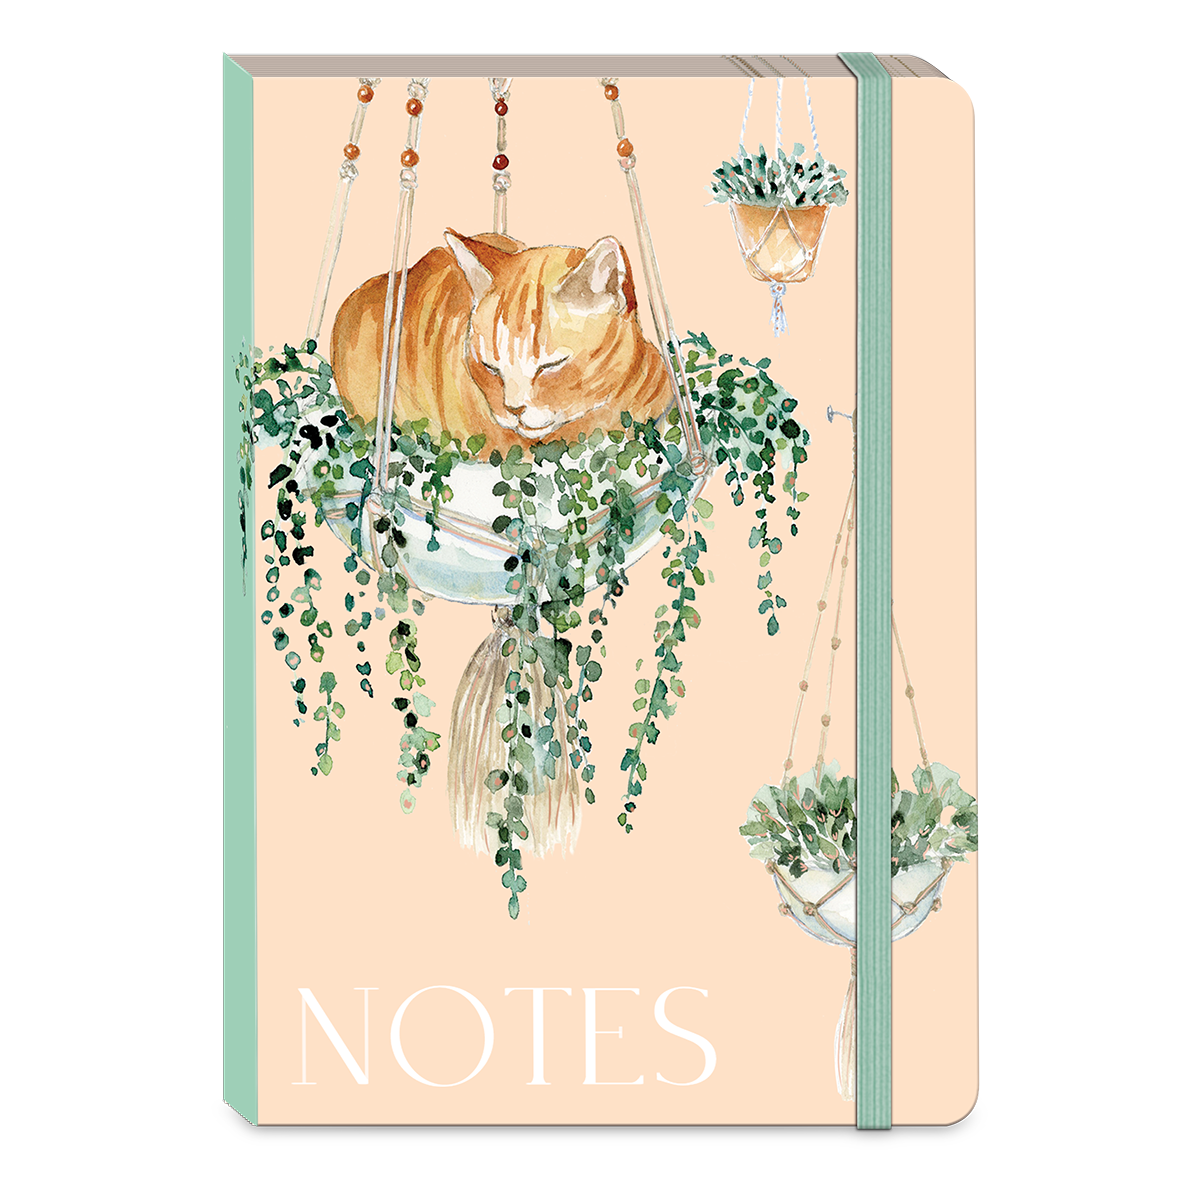 peach colored notebook with artwork of an orange cat sitting in a hanging potted plant and "notes" along the bottom.